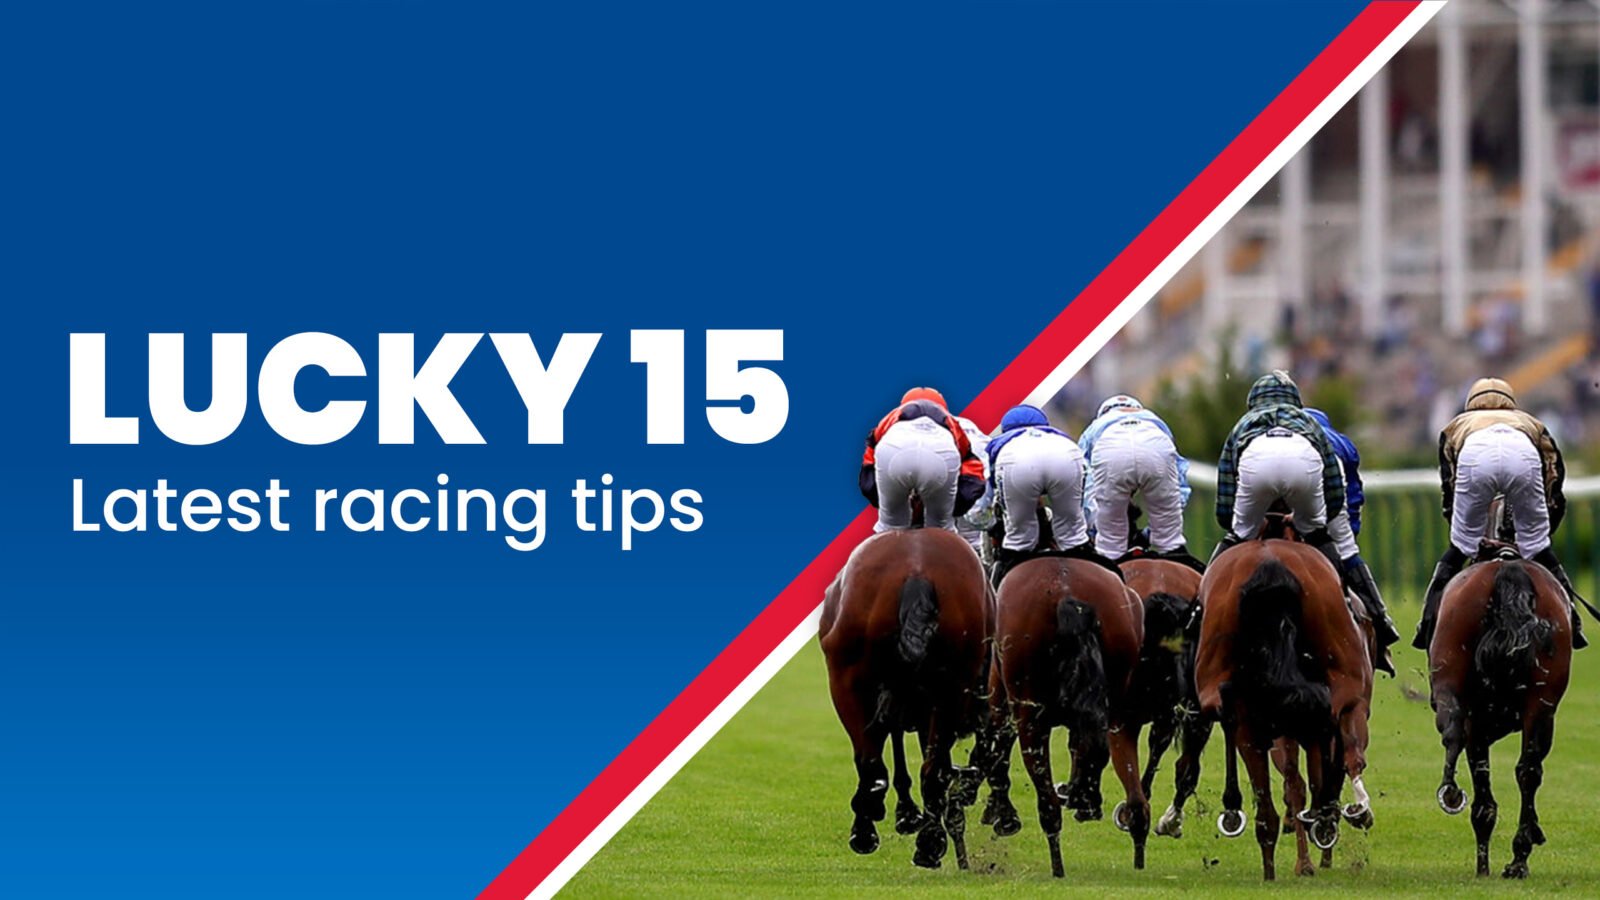 Tuesday Lucky 15 Tips: Ryan Moore could have a field day